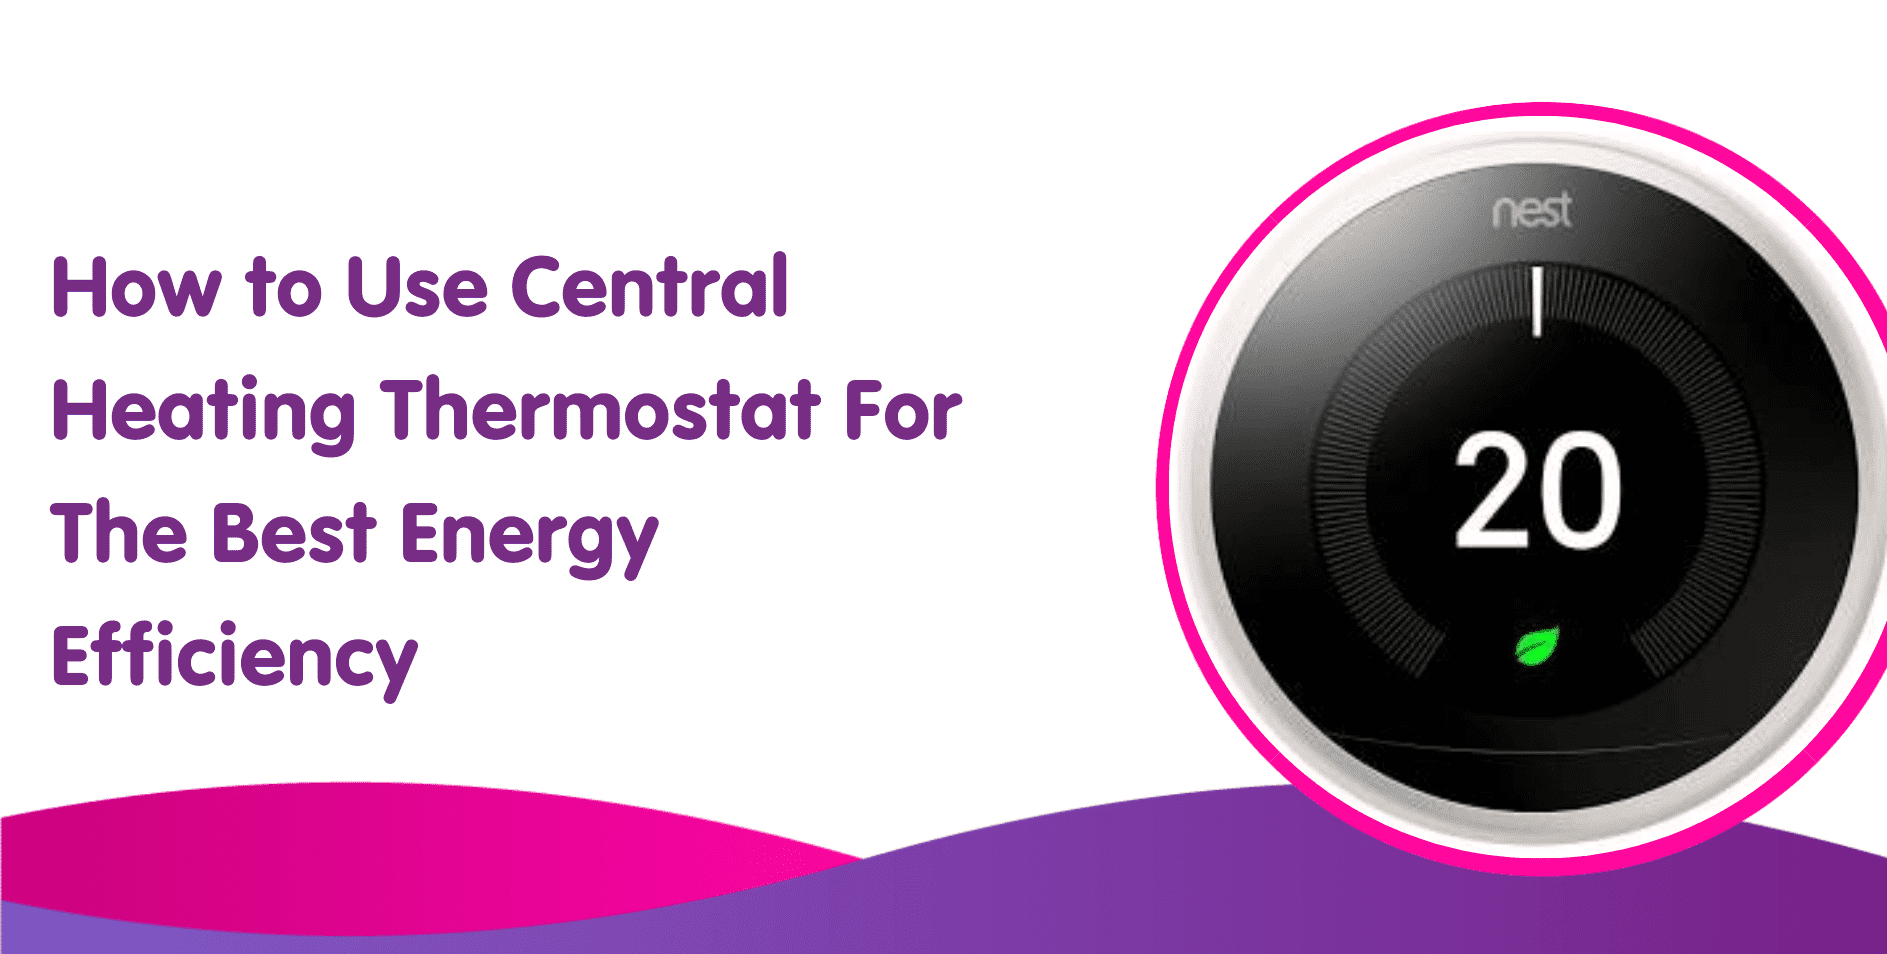 How to Use Central Heating Thermostat For The Best Energy Efficiency